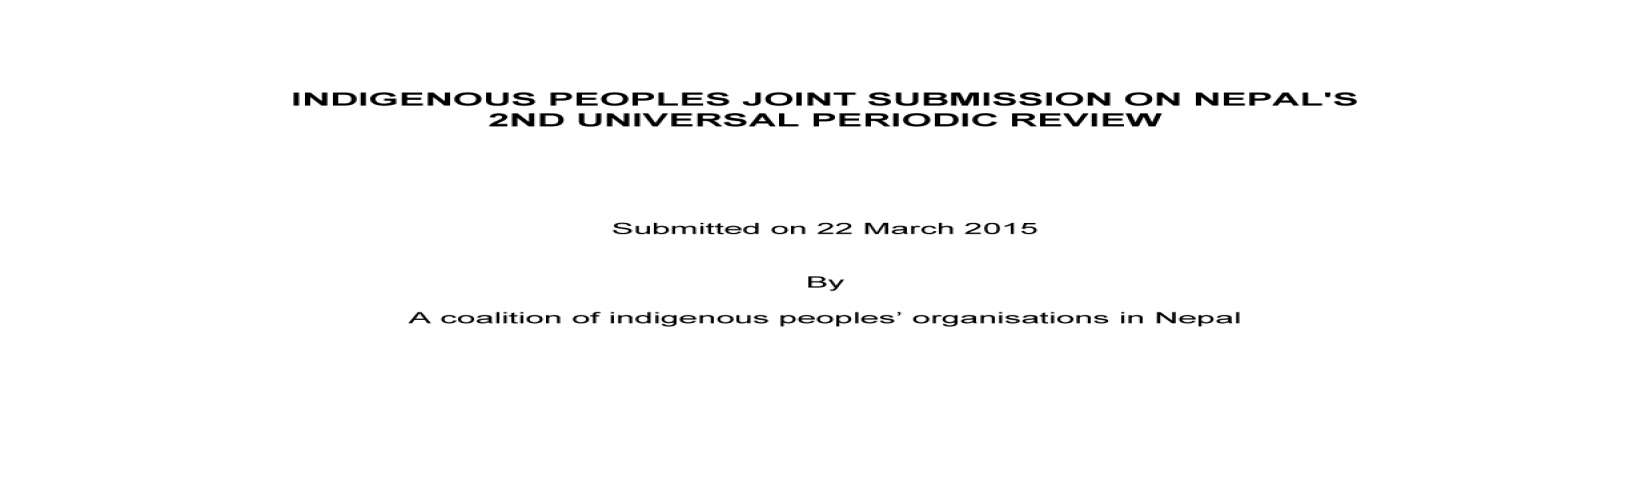 Indigenous Peoples Joint Submission on Nepal's 2nd Universal Periodic Review